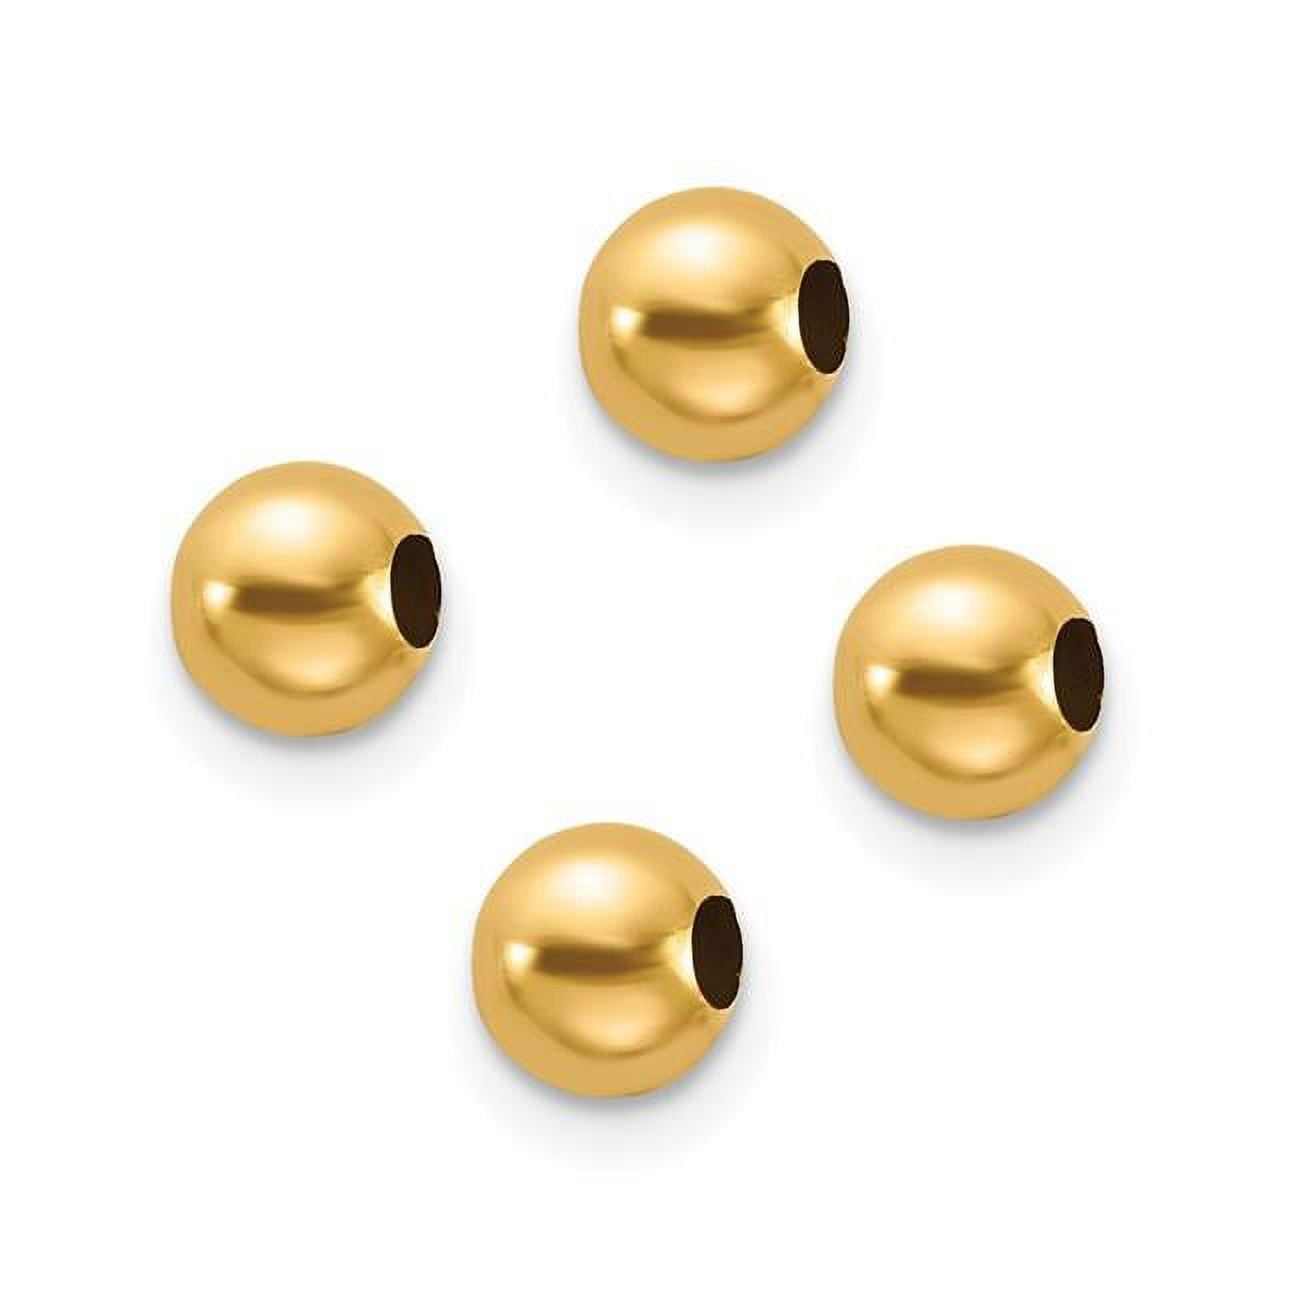 Finest Gold 10K Yellow Gold 4 mm Spacer Bead - Set of 4 